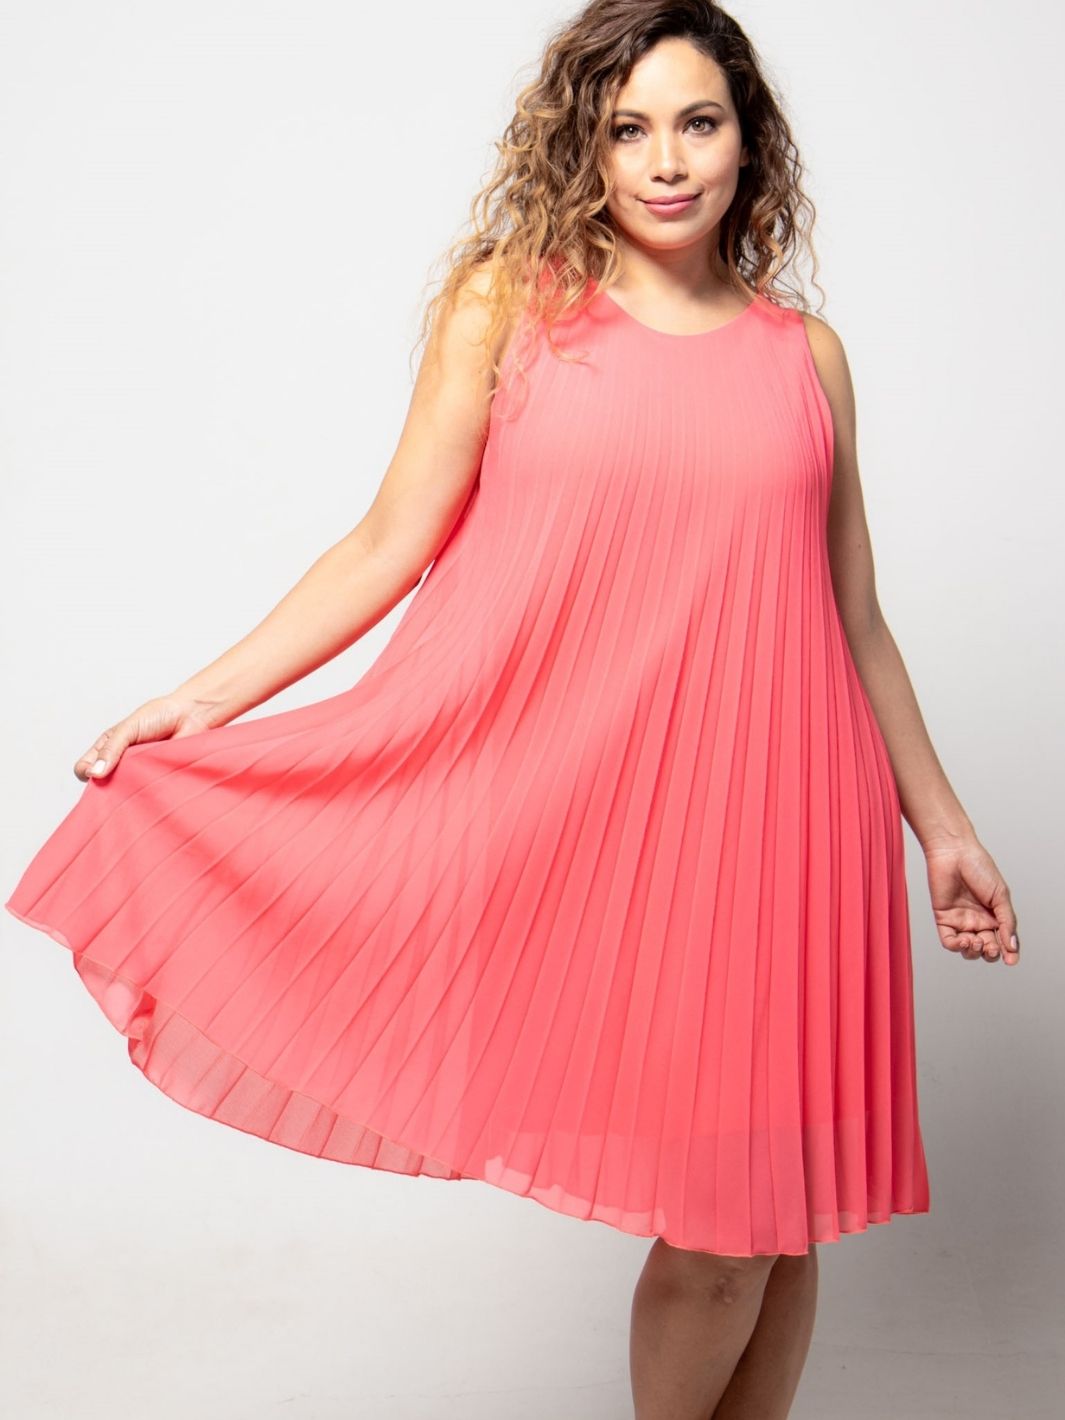 Pleated Mid Length Dress - Coral